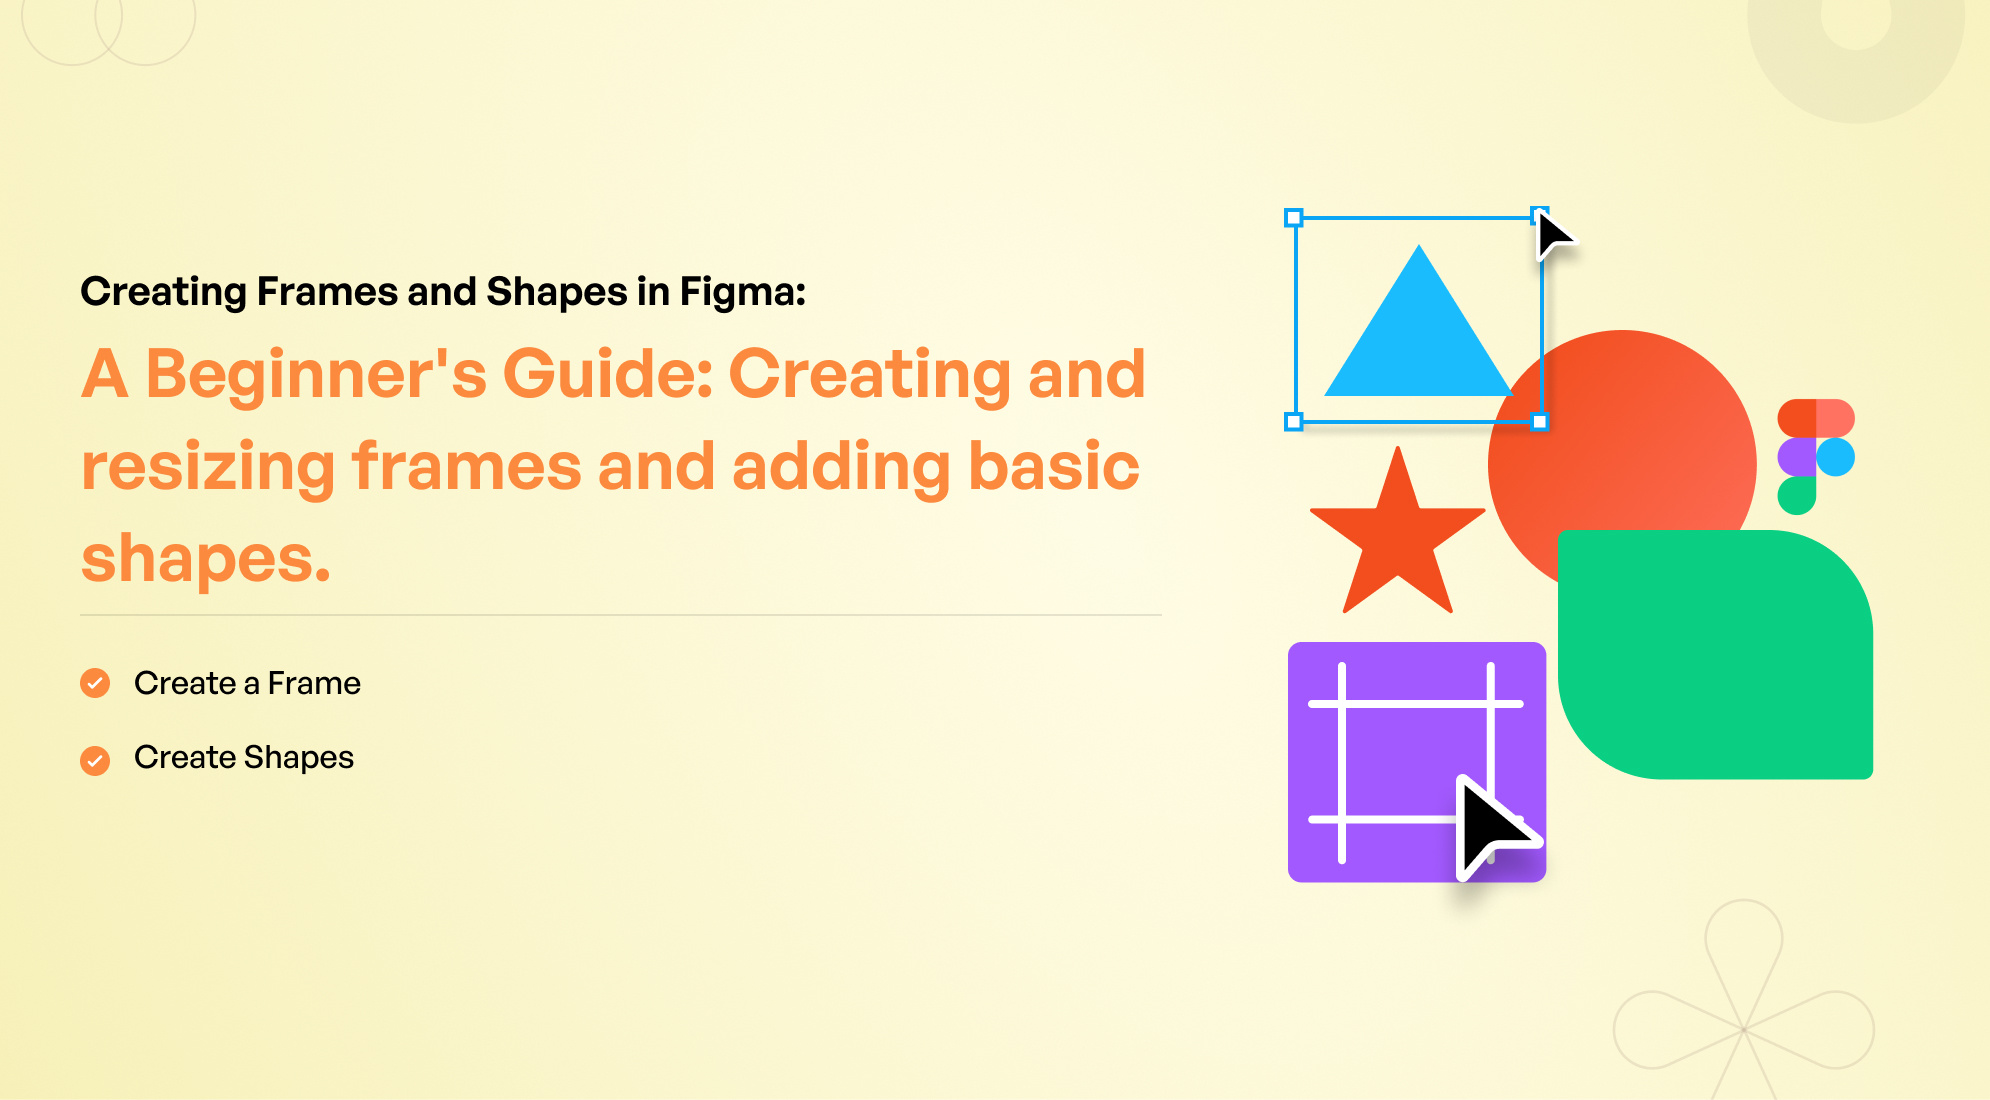 A Beginner's Guide: Creating Frames and Shapes in Figma